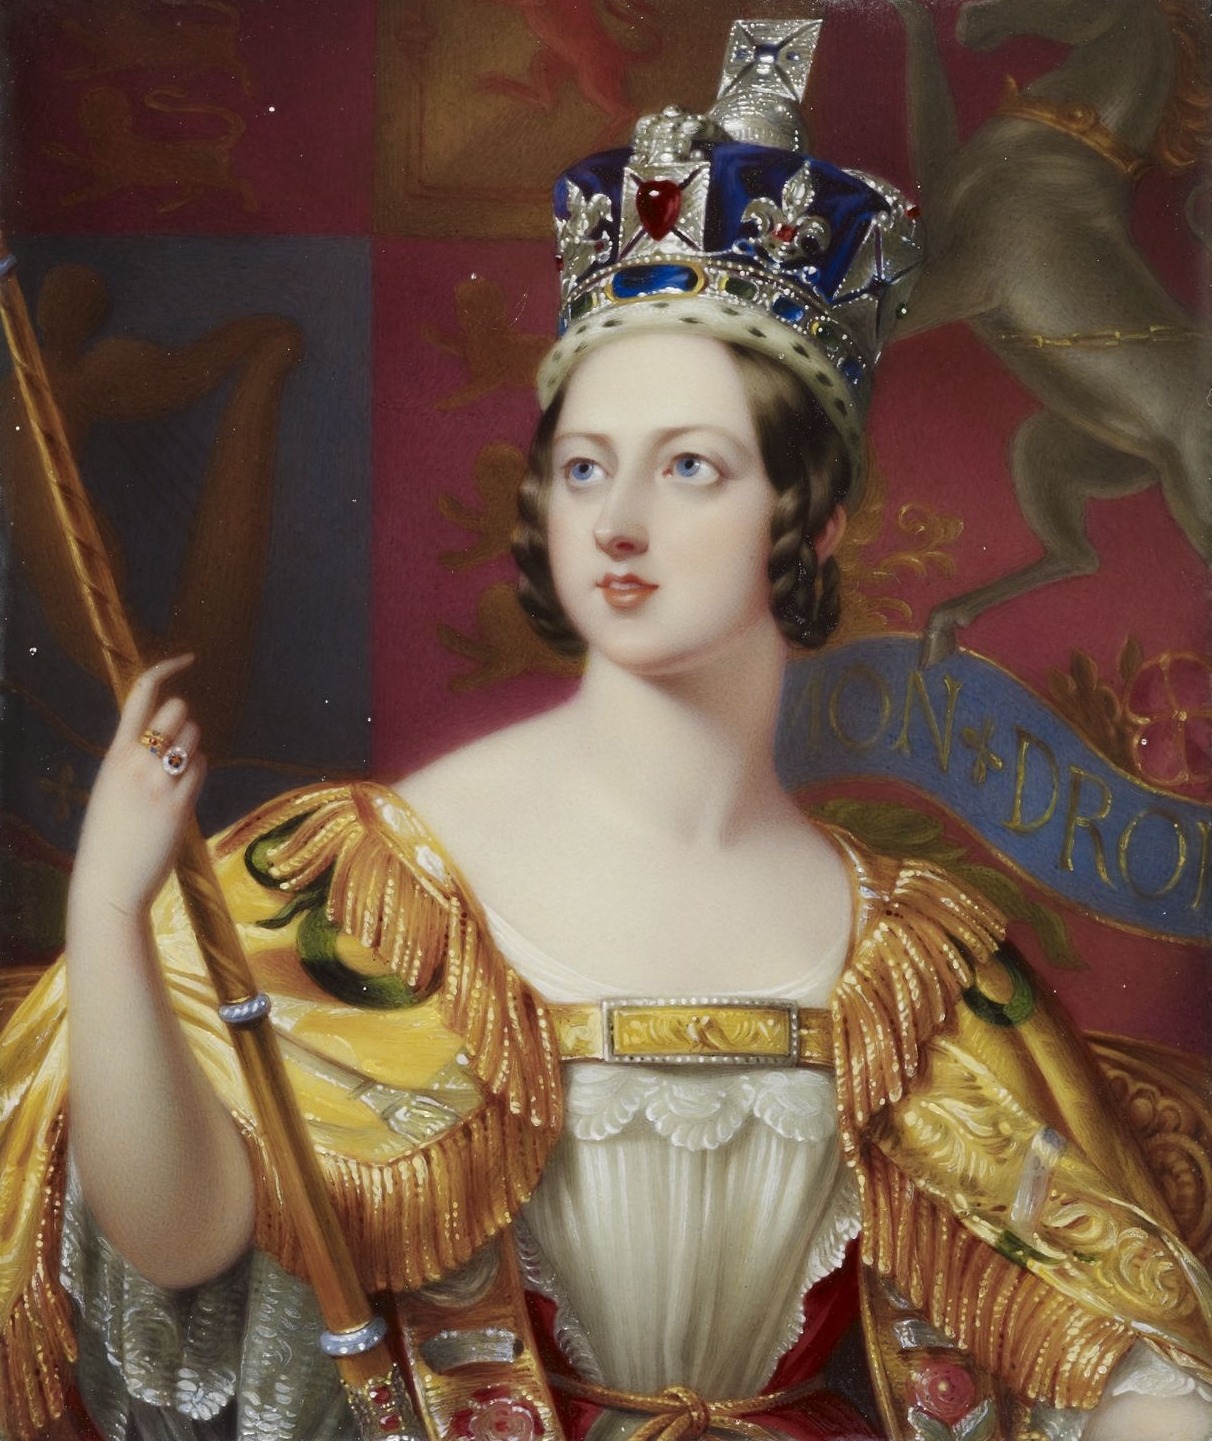 the coronation portrait of Queen Victoria painted by George Hayter